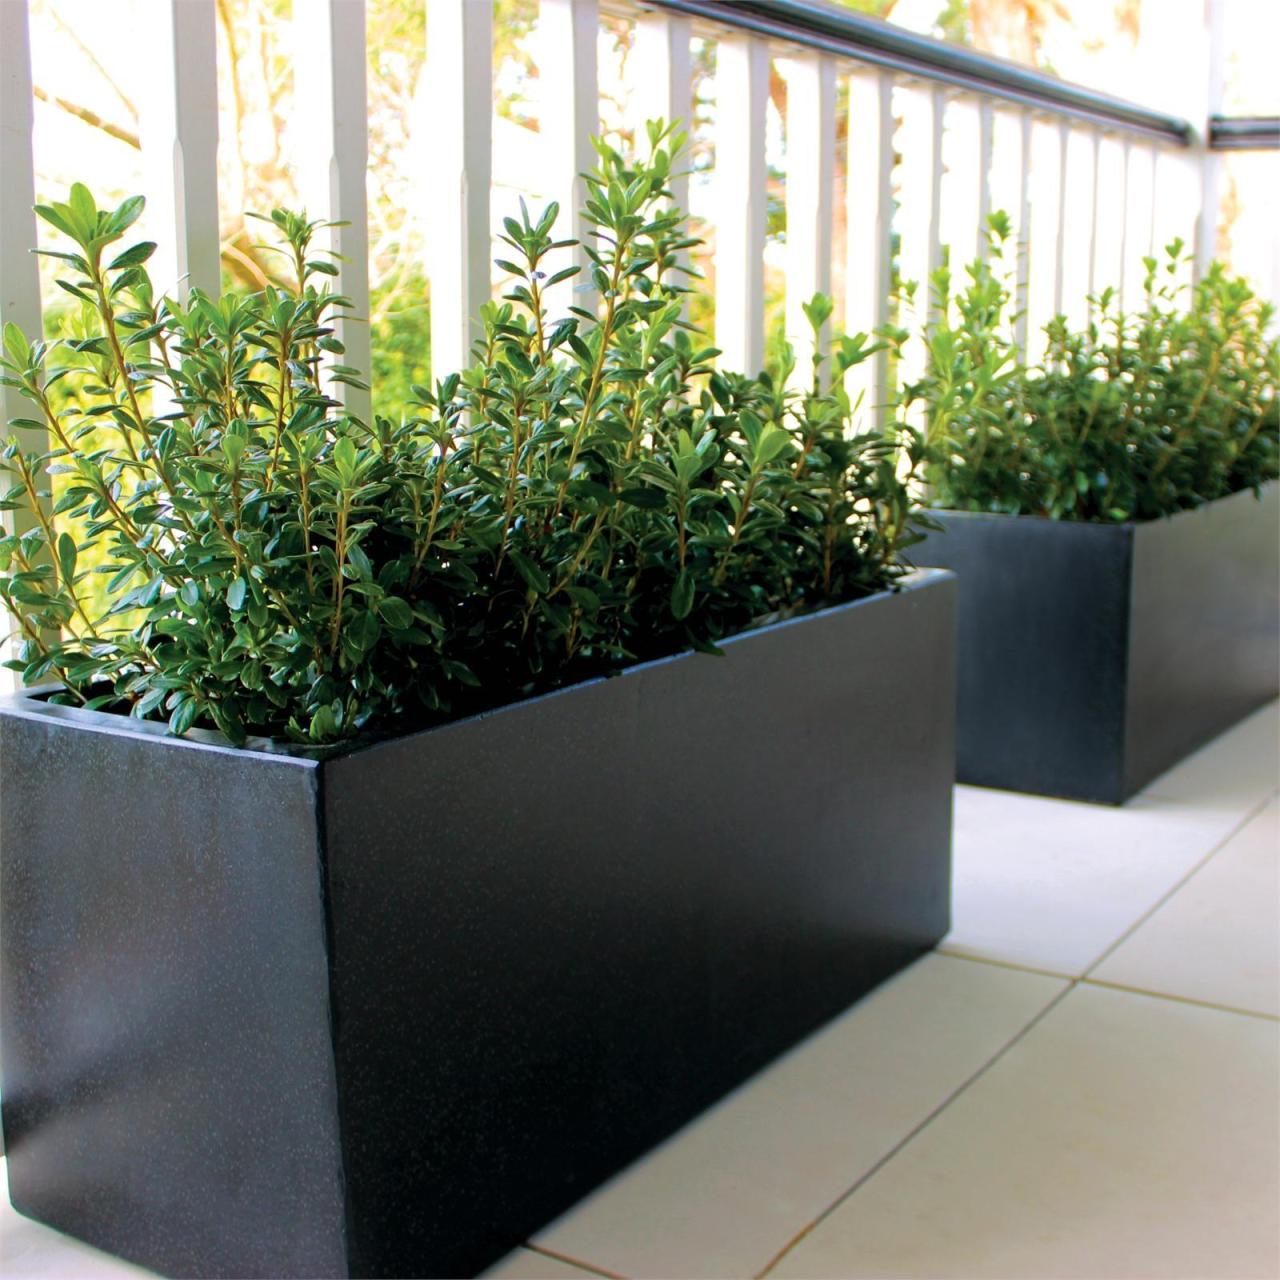 Hanging Plants Indoor | Bunnings Large Lightweight Pots: Enhance Your Garden with Style and Convenience